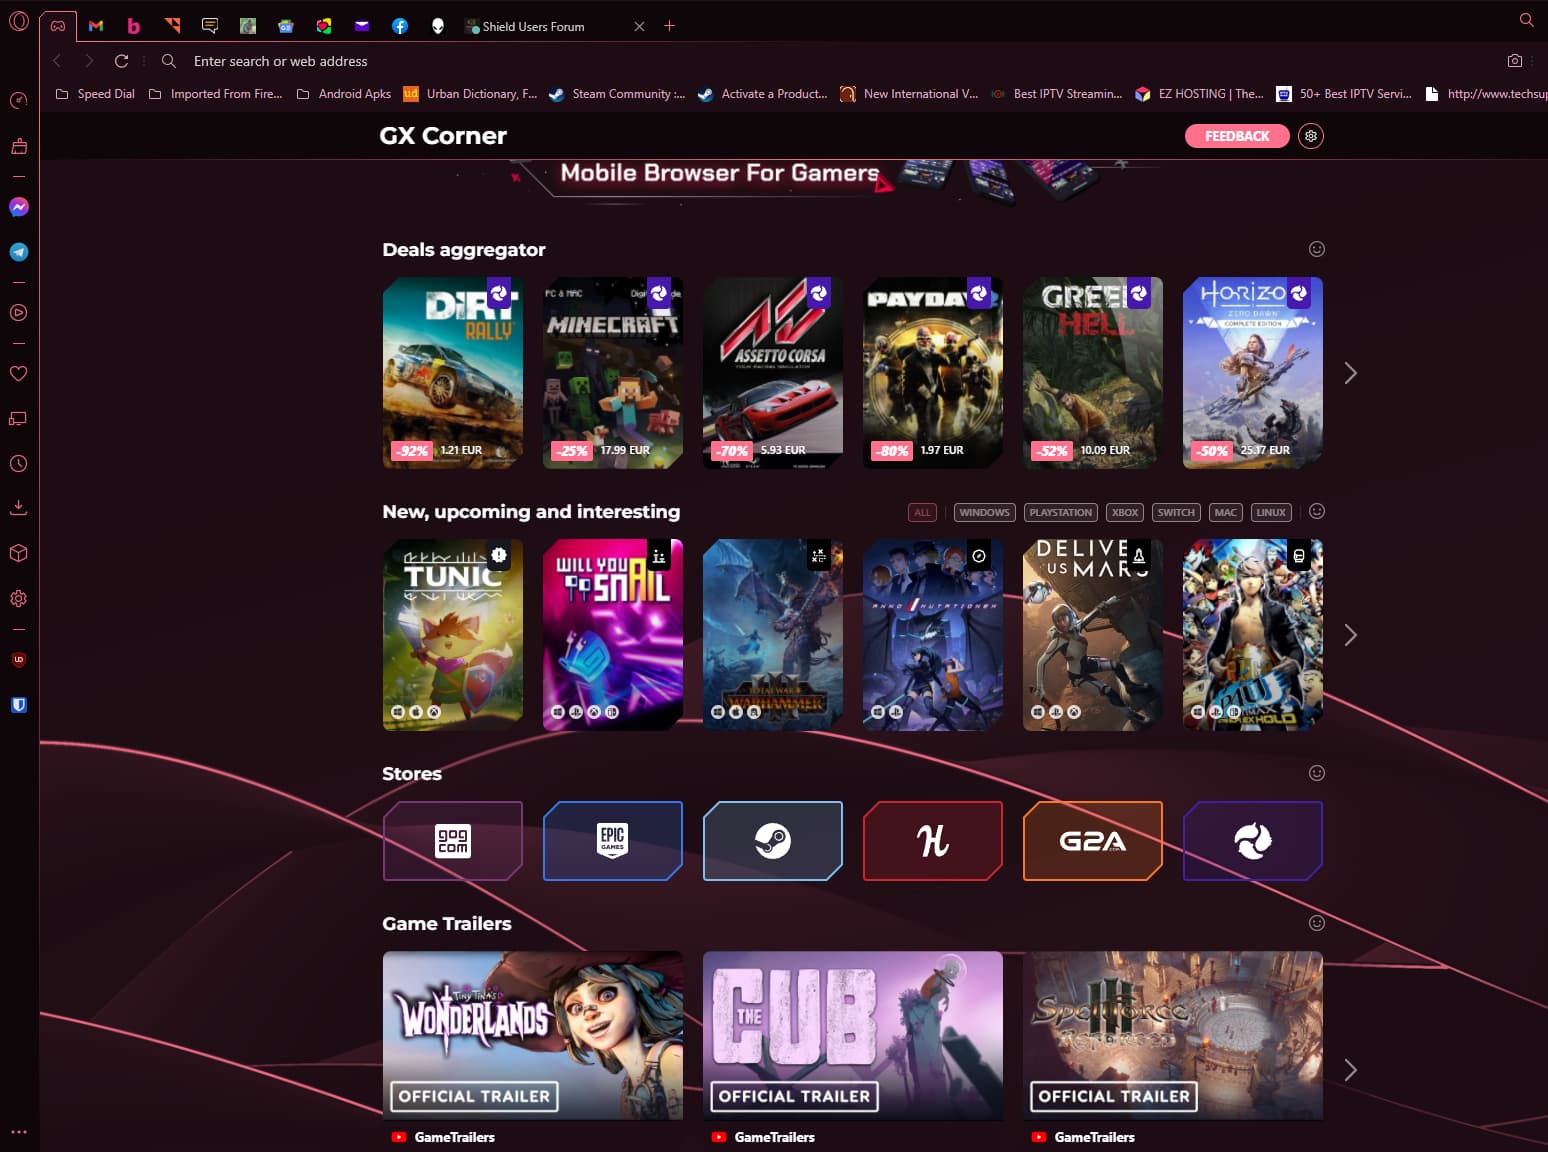 Opera GX gaming browser exceeds 8 million active users